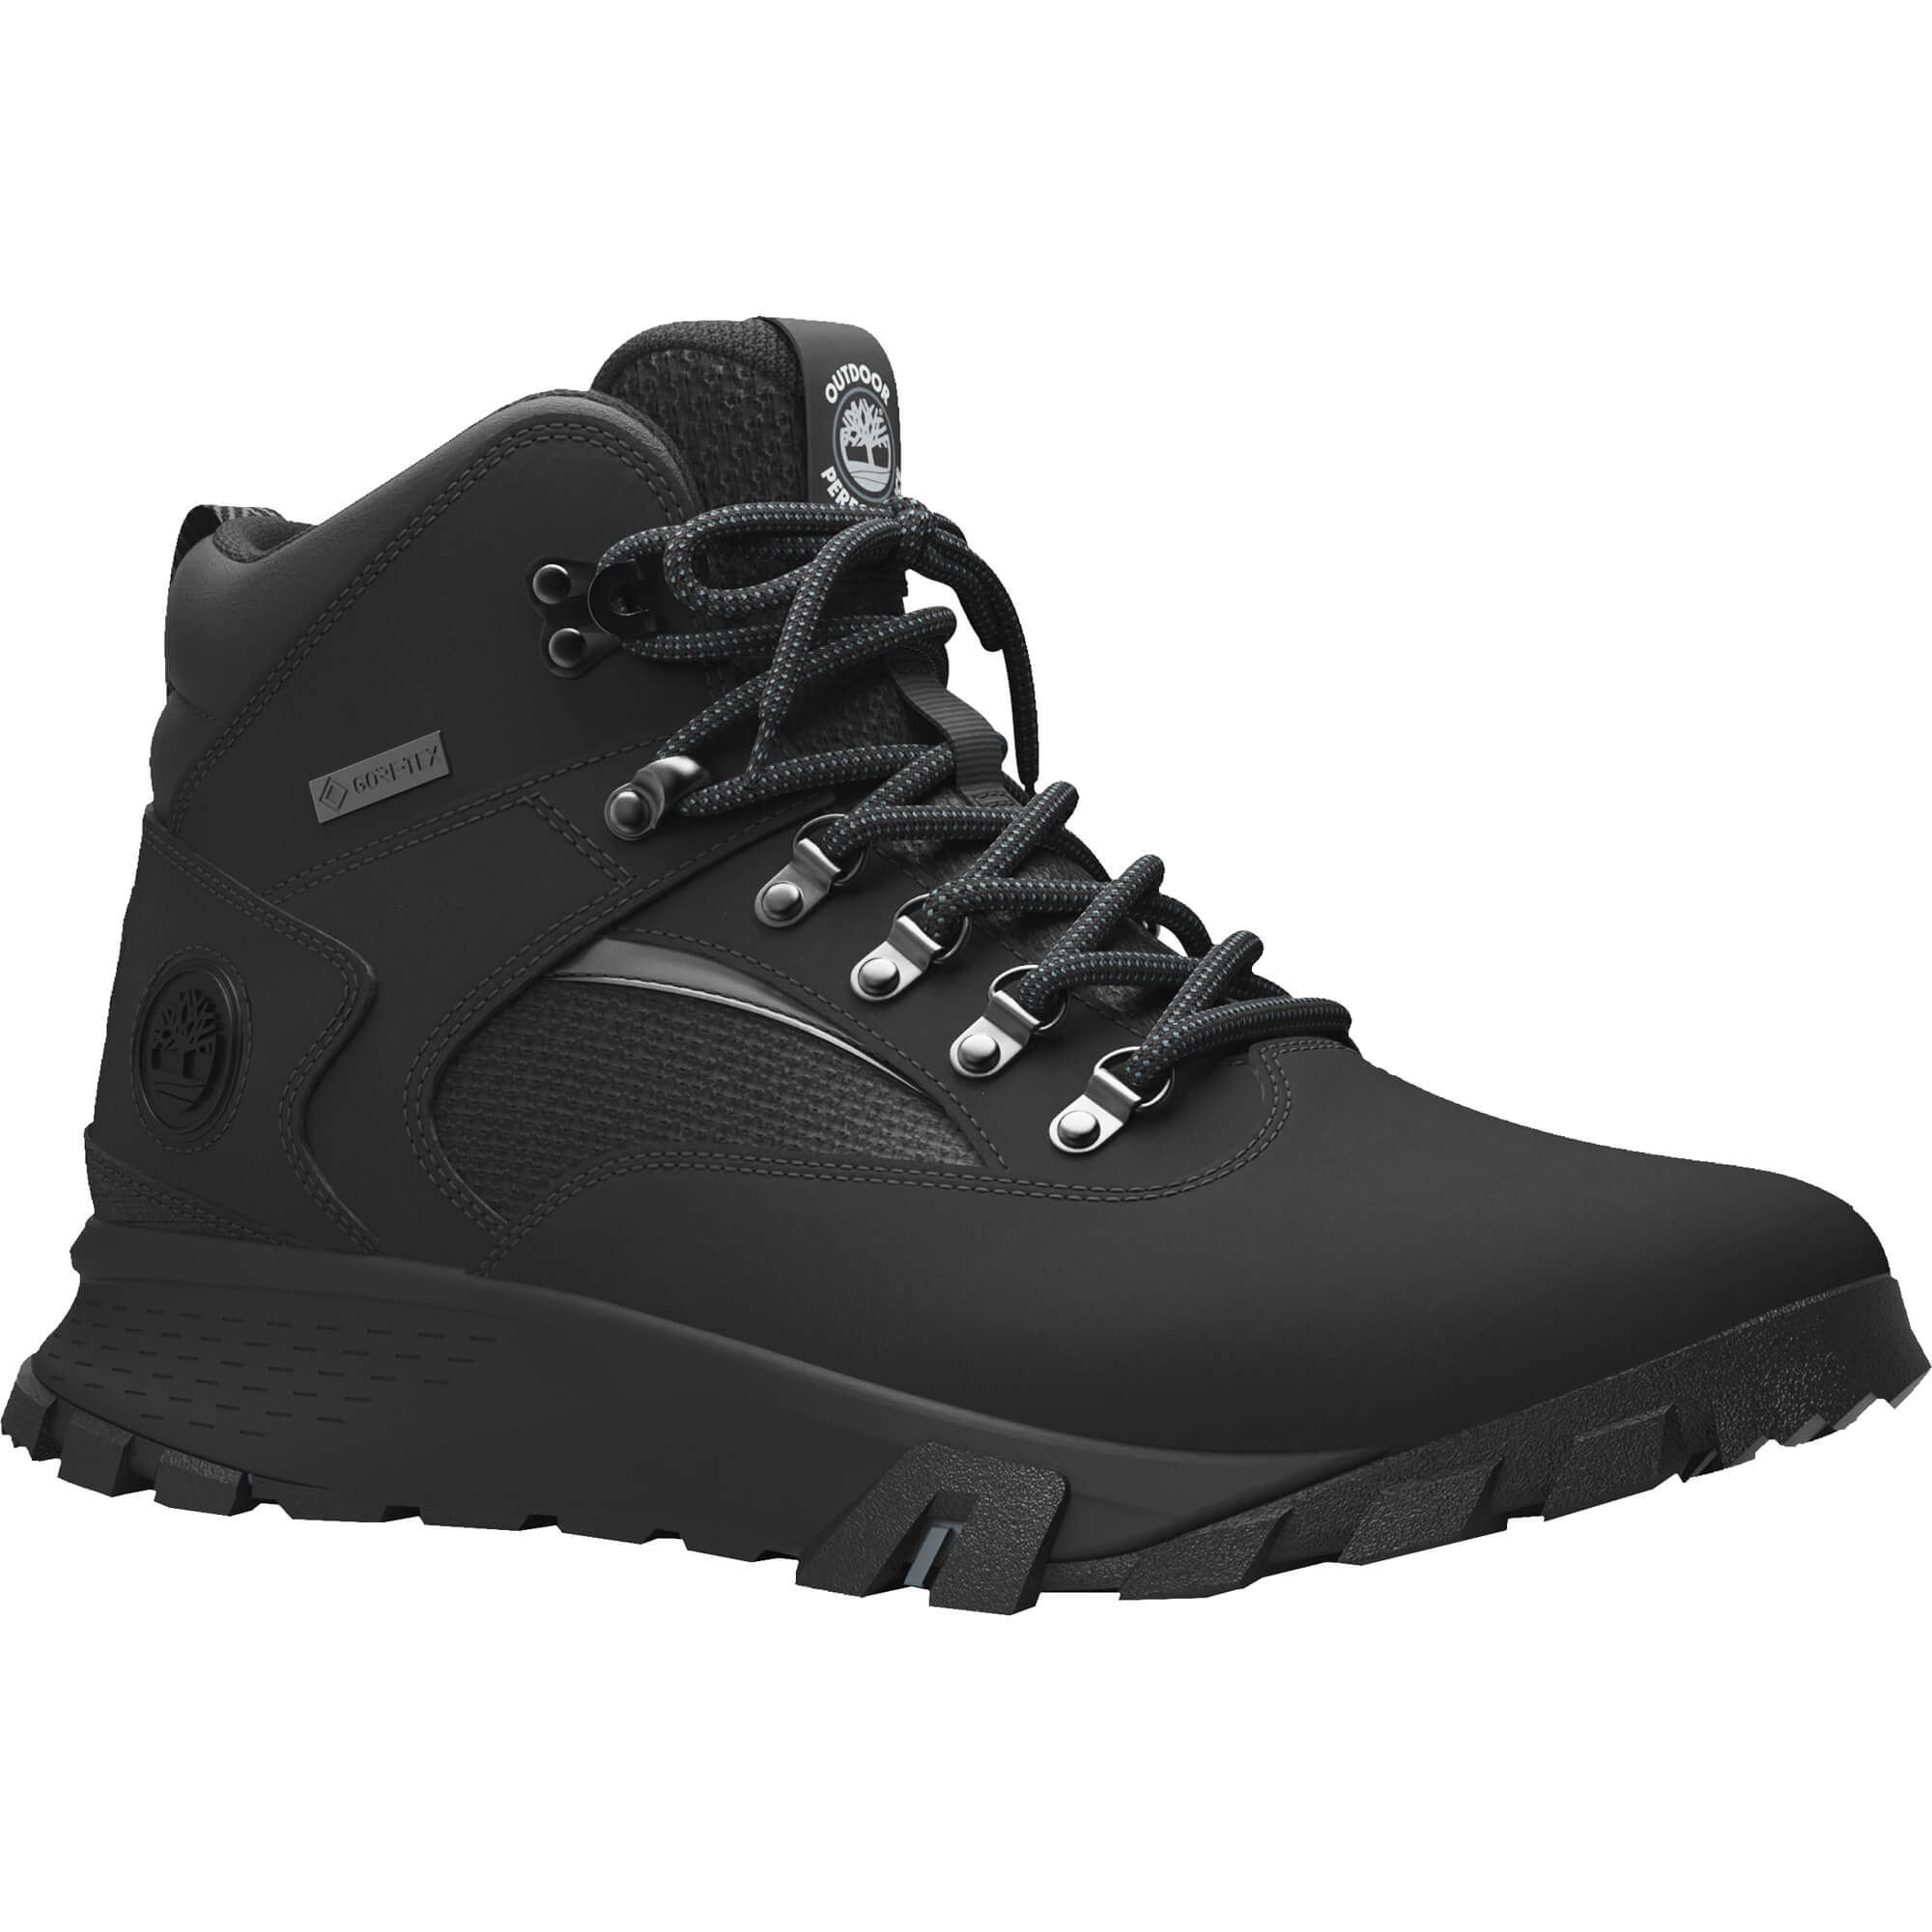 Timberland Mt Lincoln Mid GTX Men's Hiking Boots